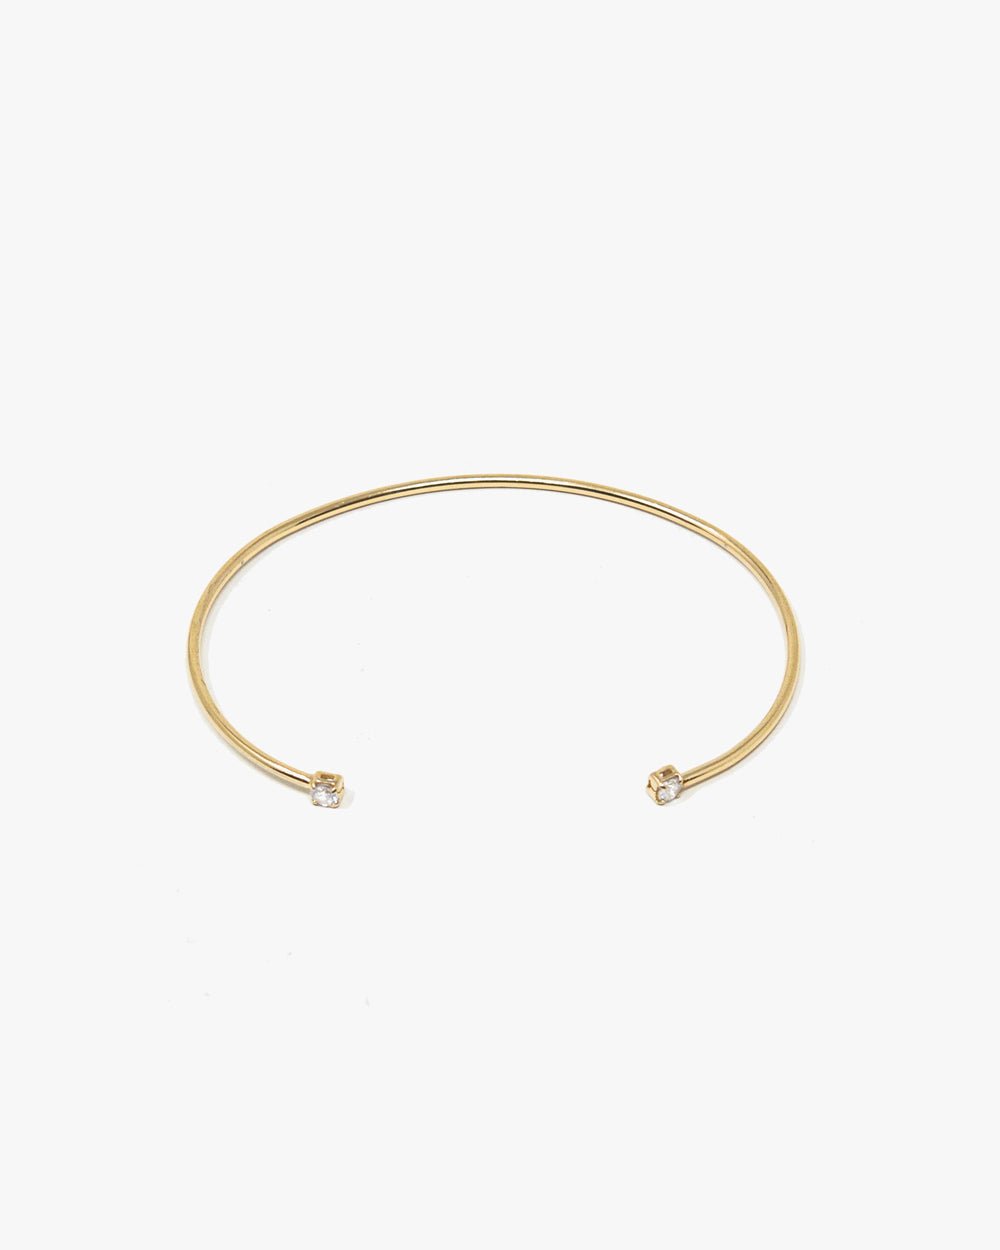 IMOGEN CZ OPEN BANGLE - Shop Cupcakes and Cashmere